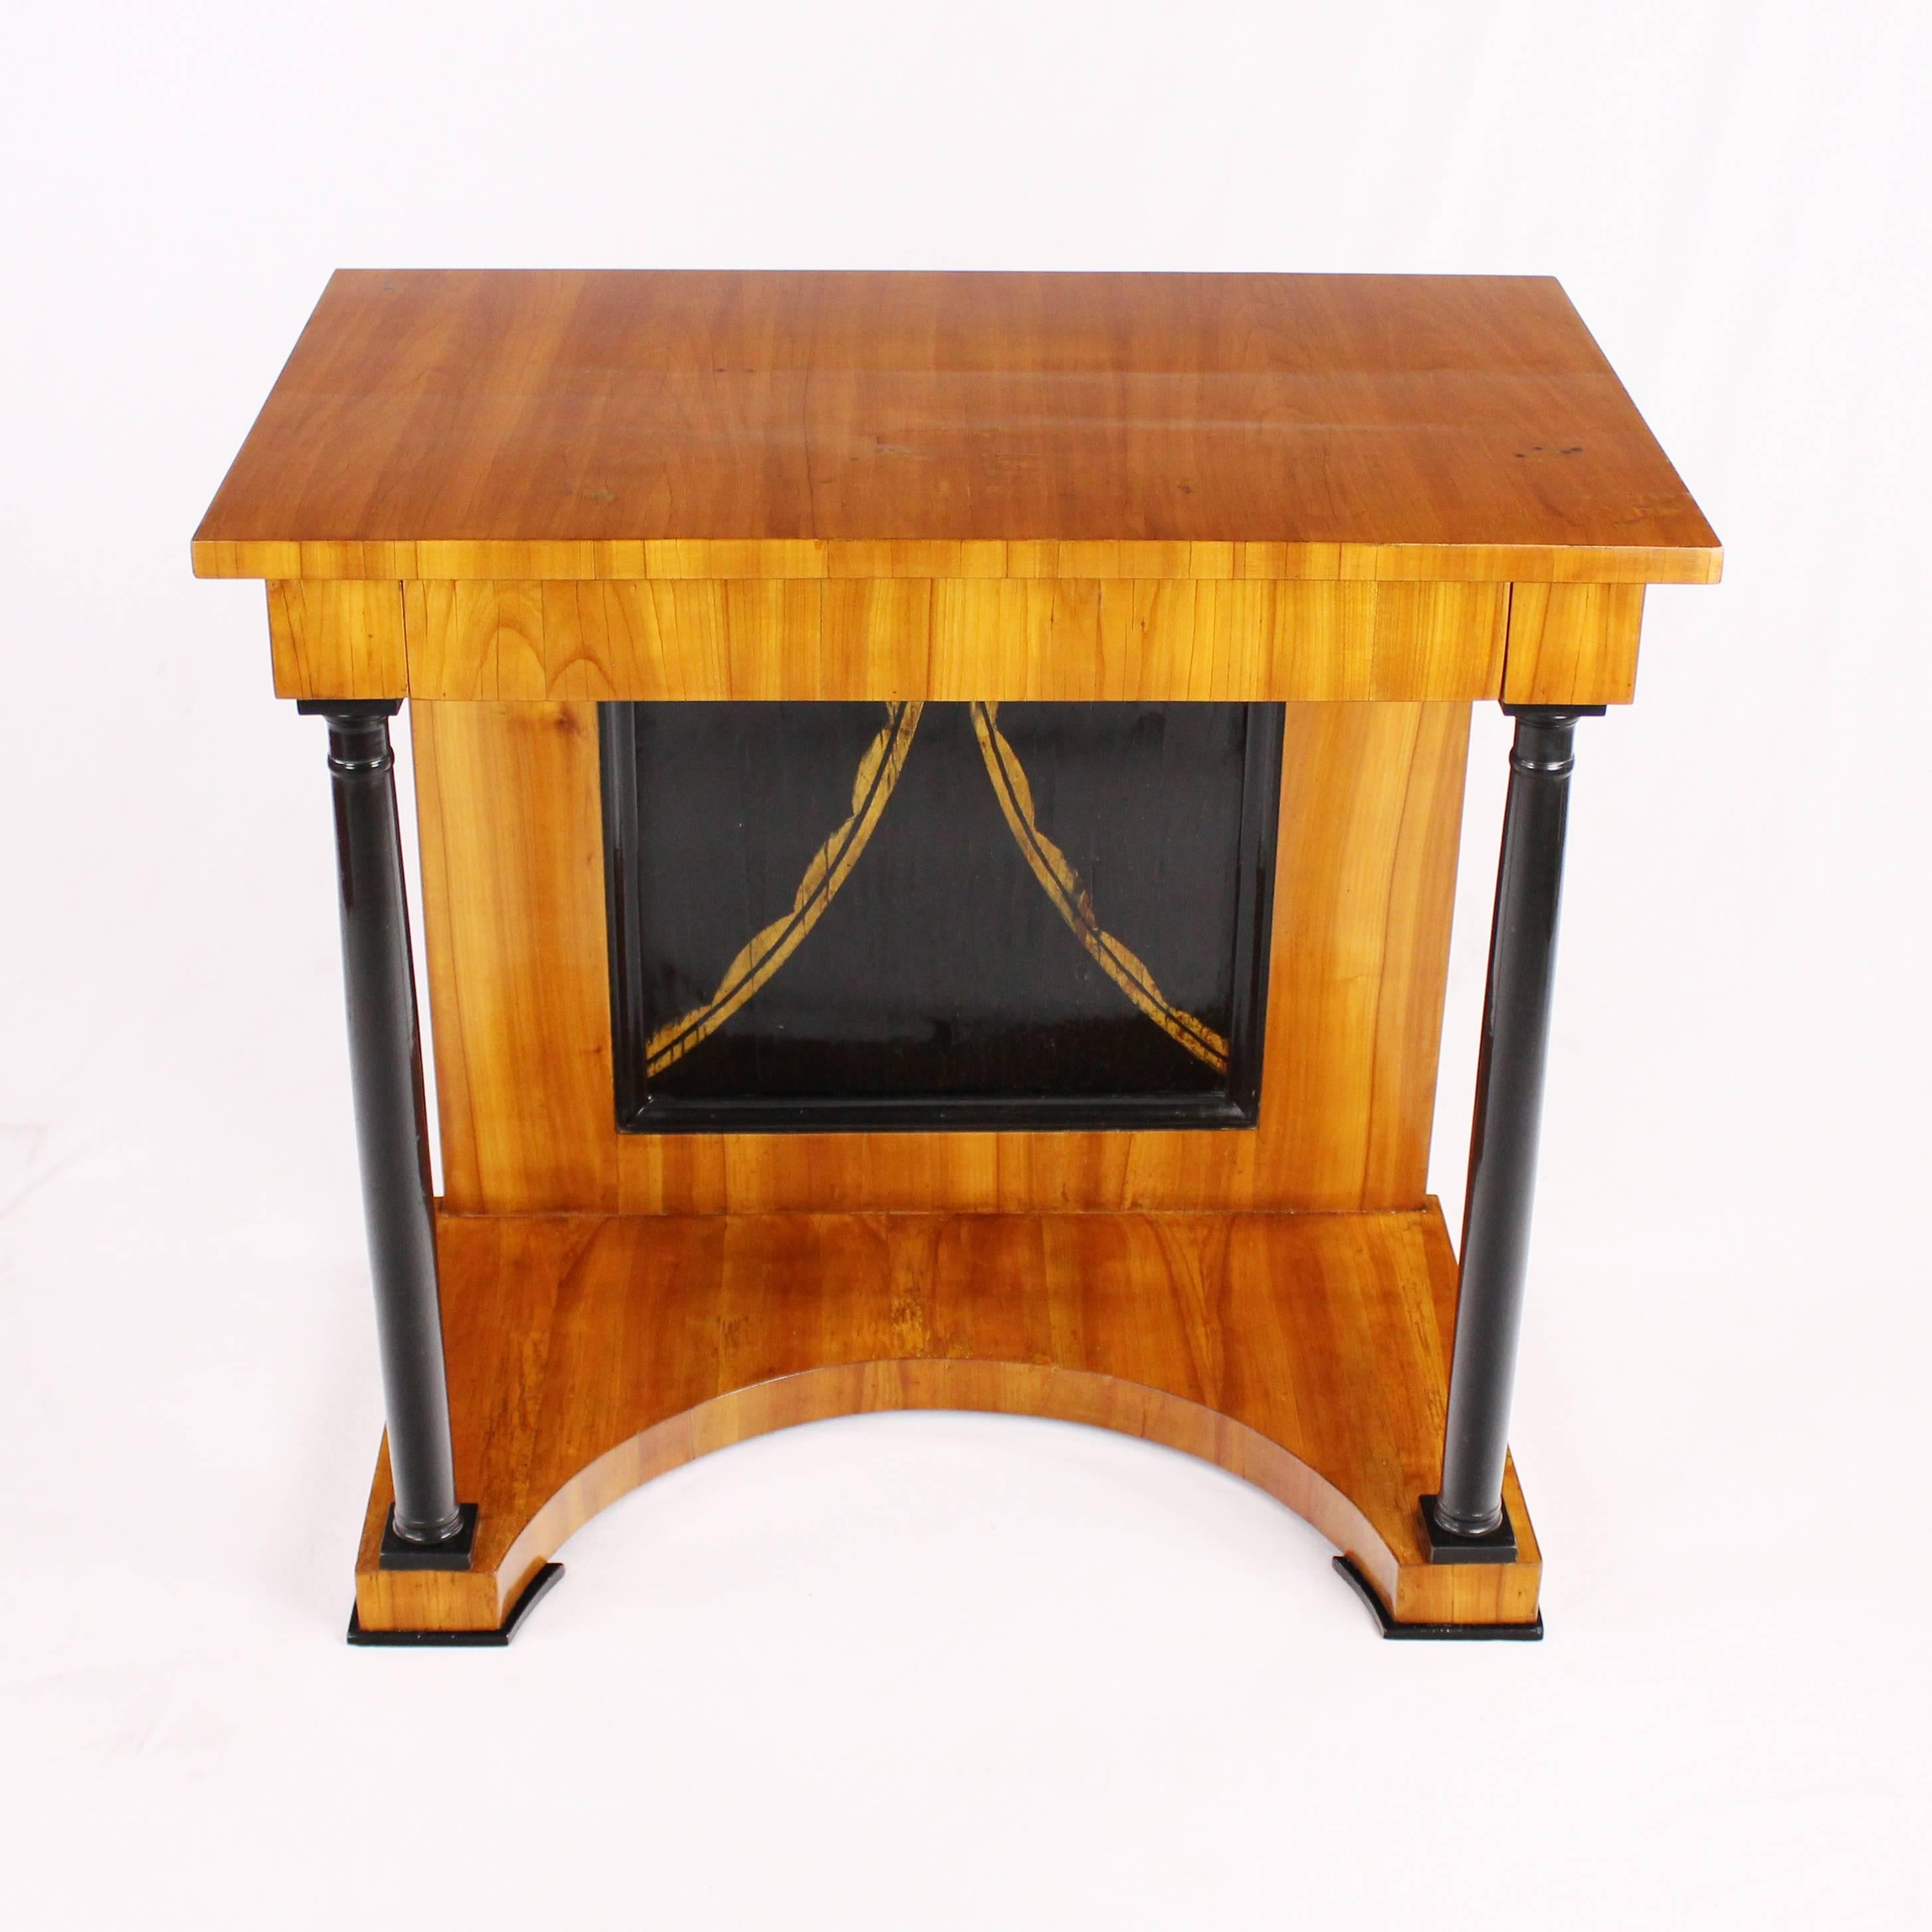 • 19th century Biedermeier period console, circa 1820
• Very rare model
• Cherry tree
• Concealed head push
• On the left and on the right ebonized sculptural full columns
• Restored residential-ready state
• French shellac hand polish
•